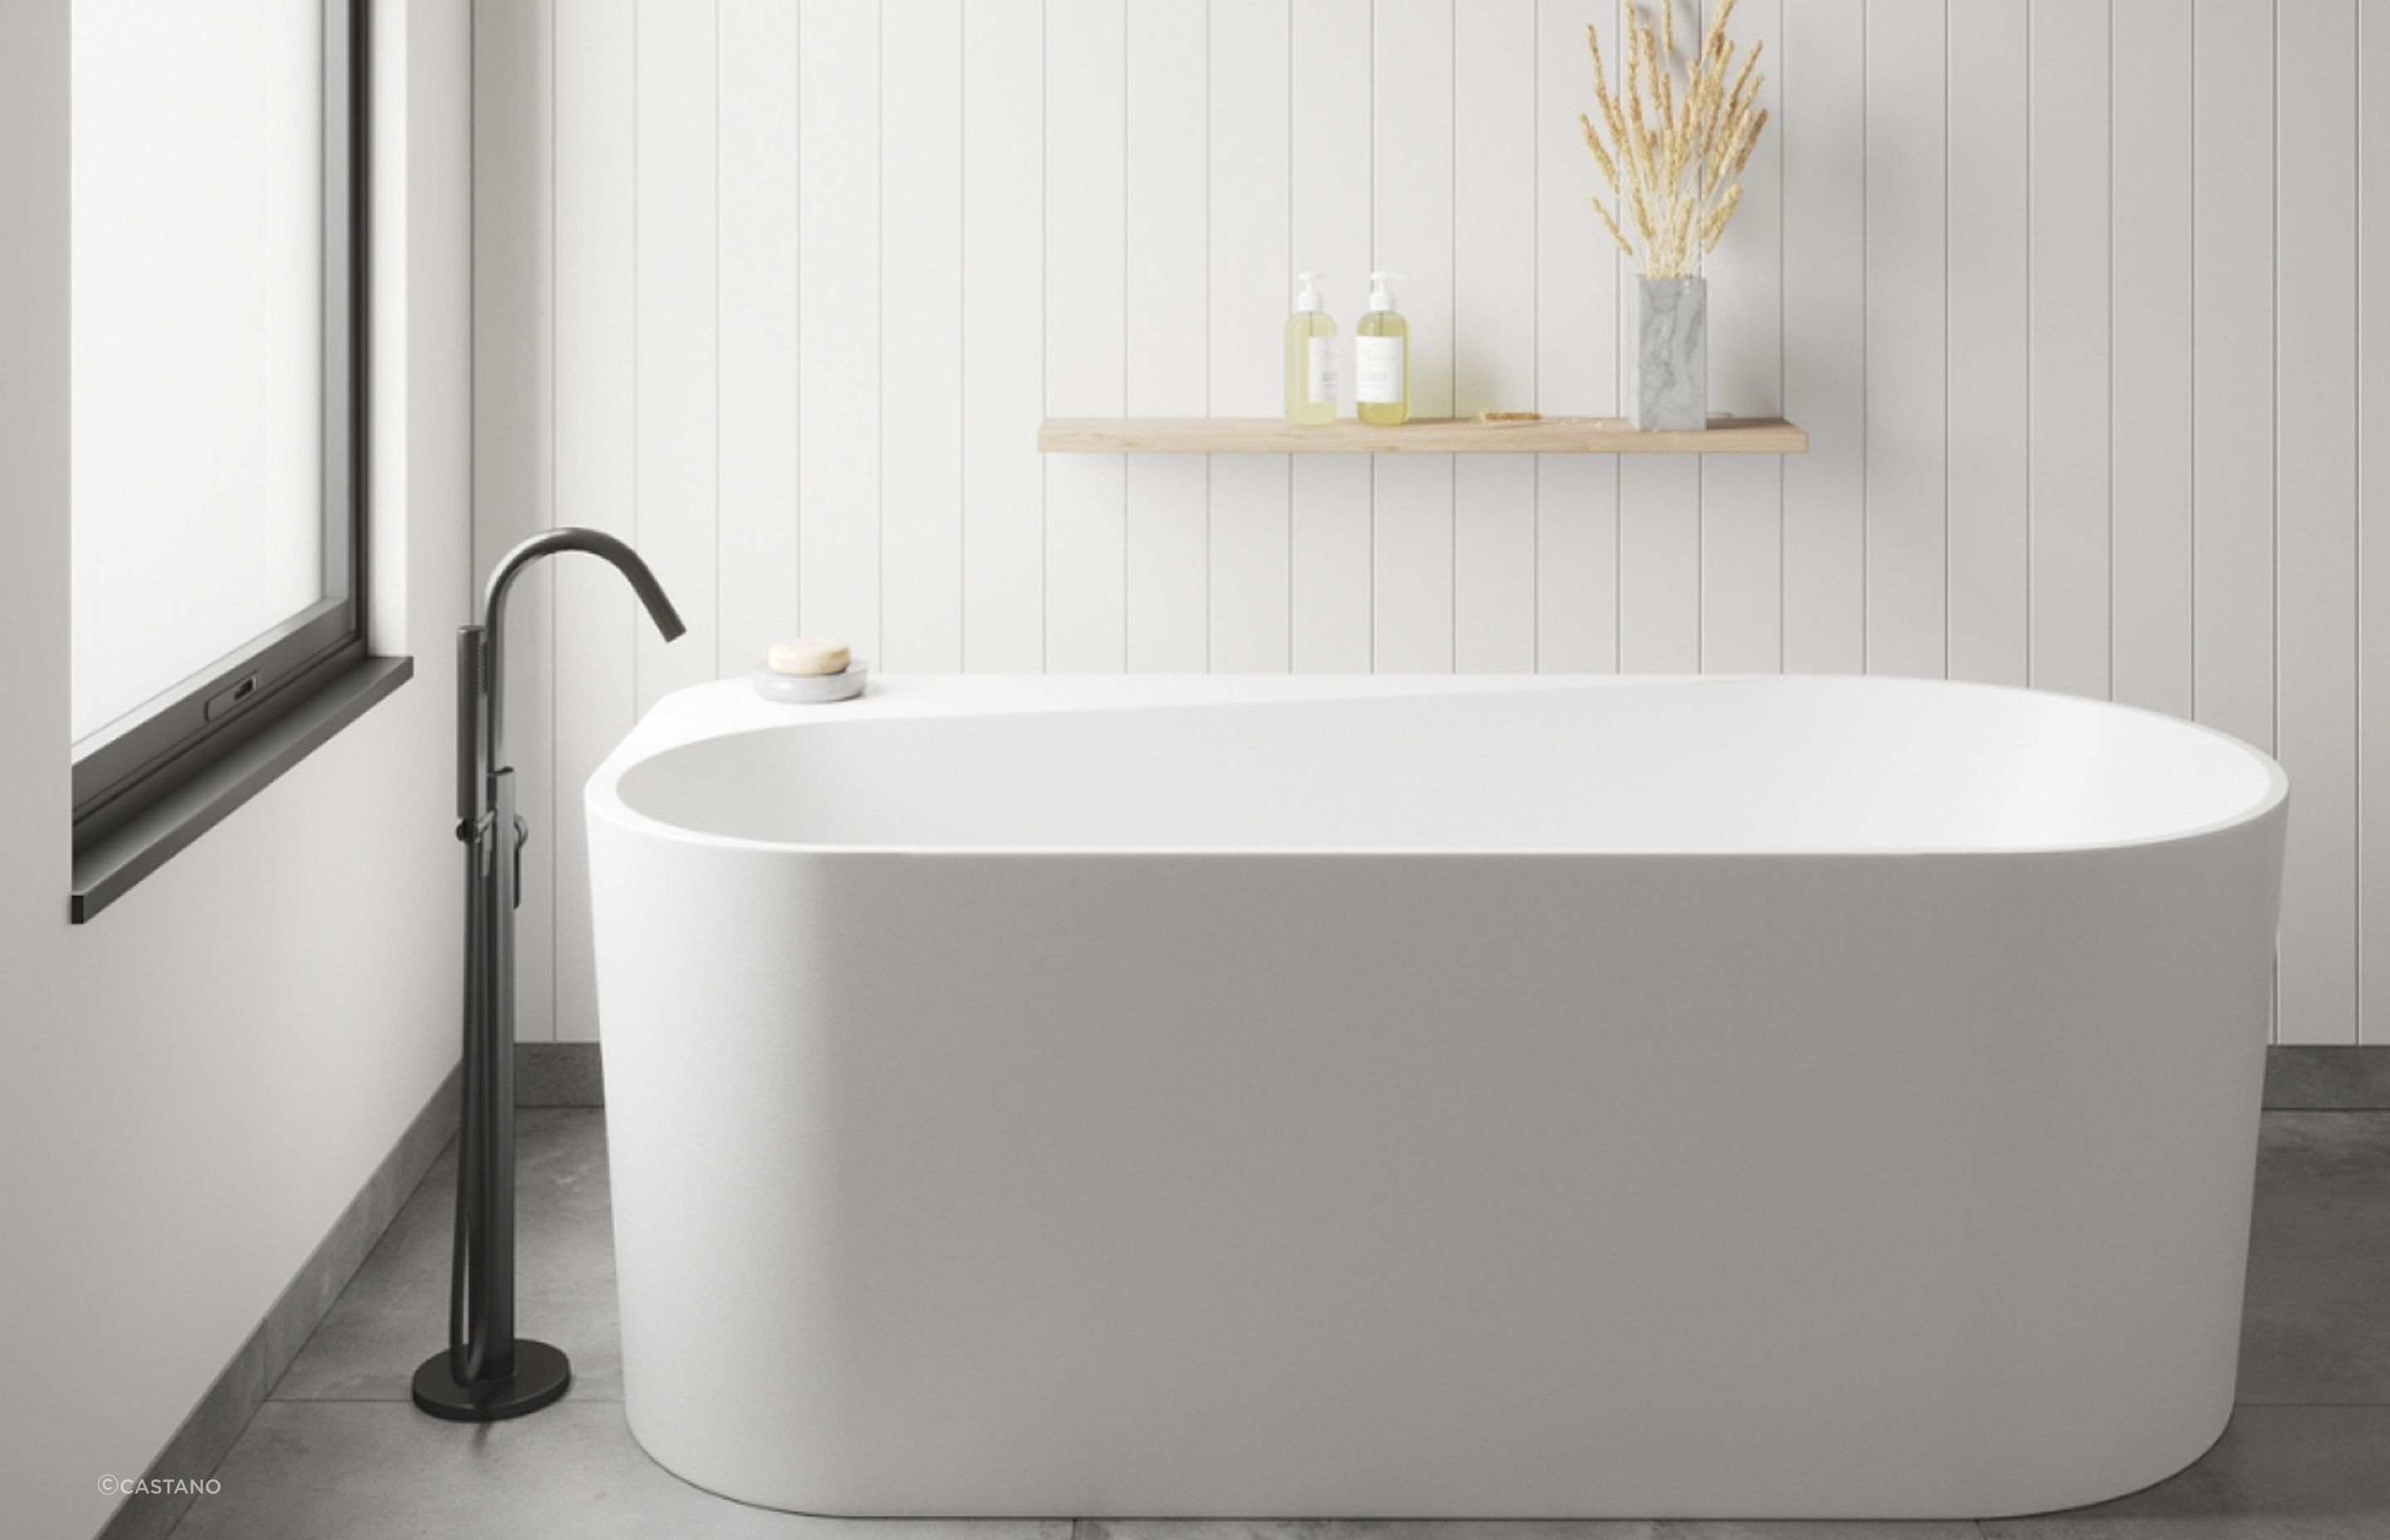 The Velino 1676 LH Freestanding Bath is a sleek, stylish and practical choice with a flat surface designed in for bathroom essentials.